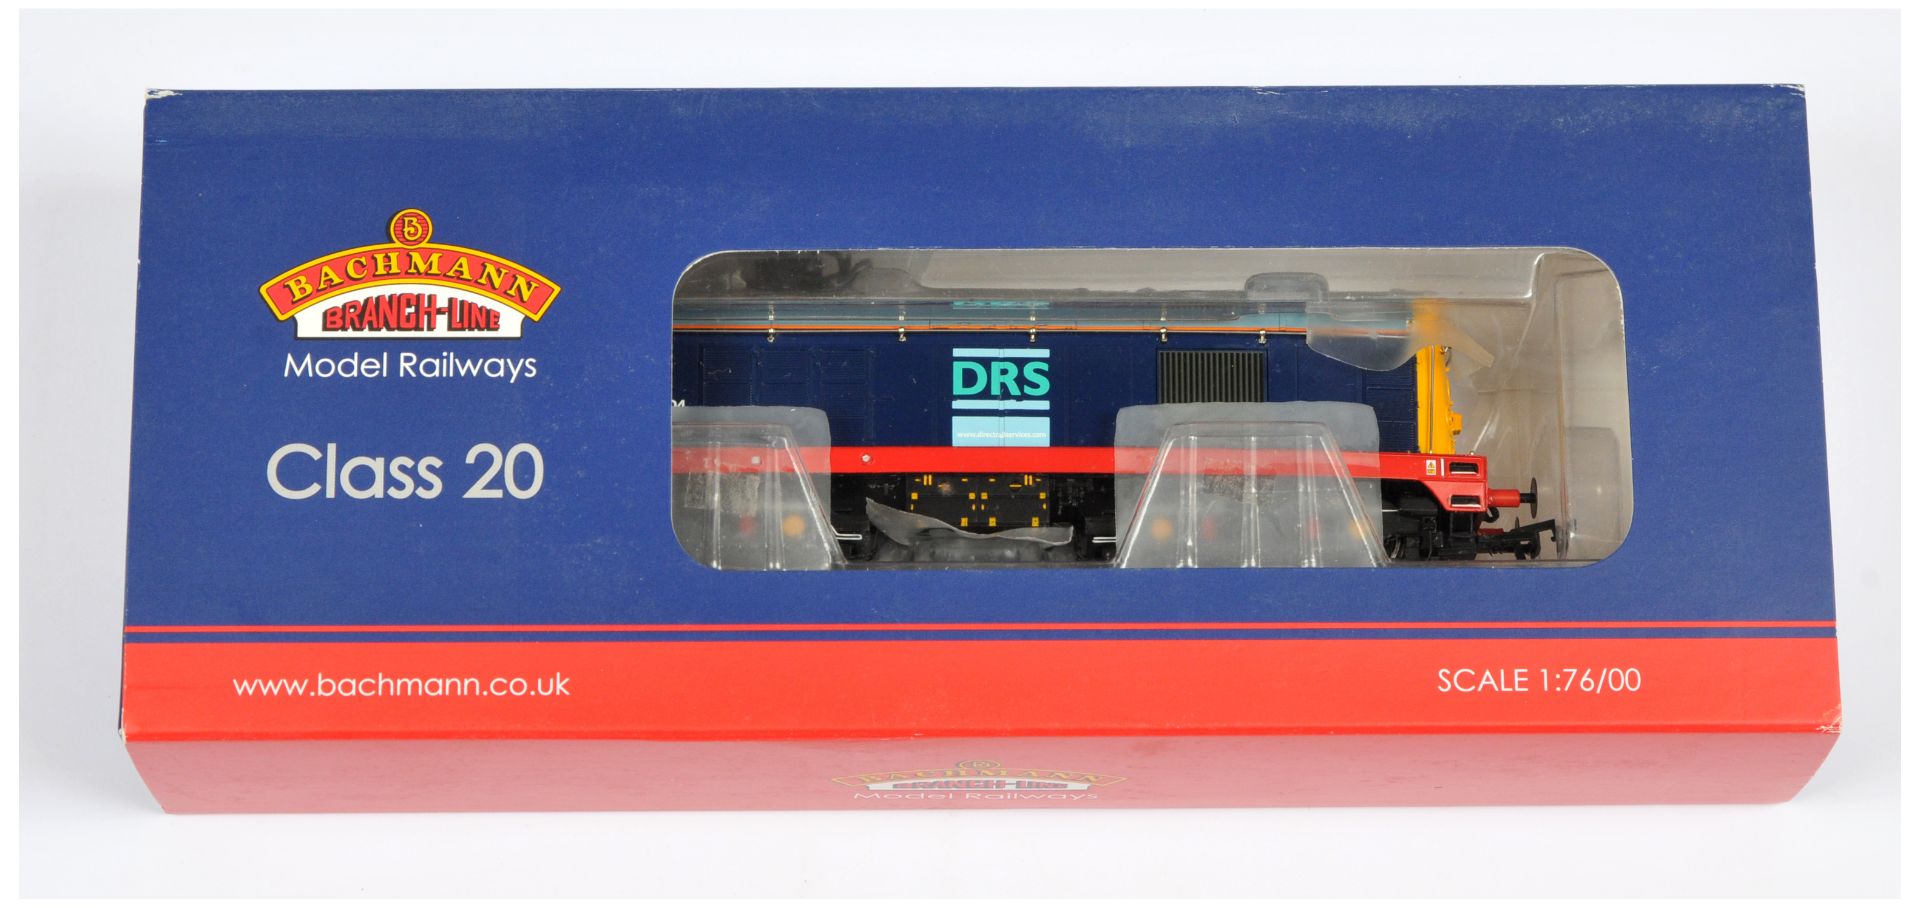 Bachmann OO Gauge 32-025Z Class 20 DRS Diesel Locomotive No. 20904, produced exclusively for Mode...